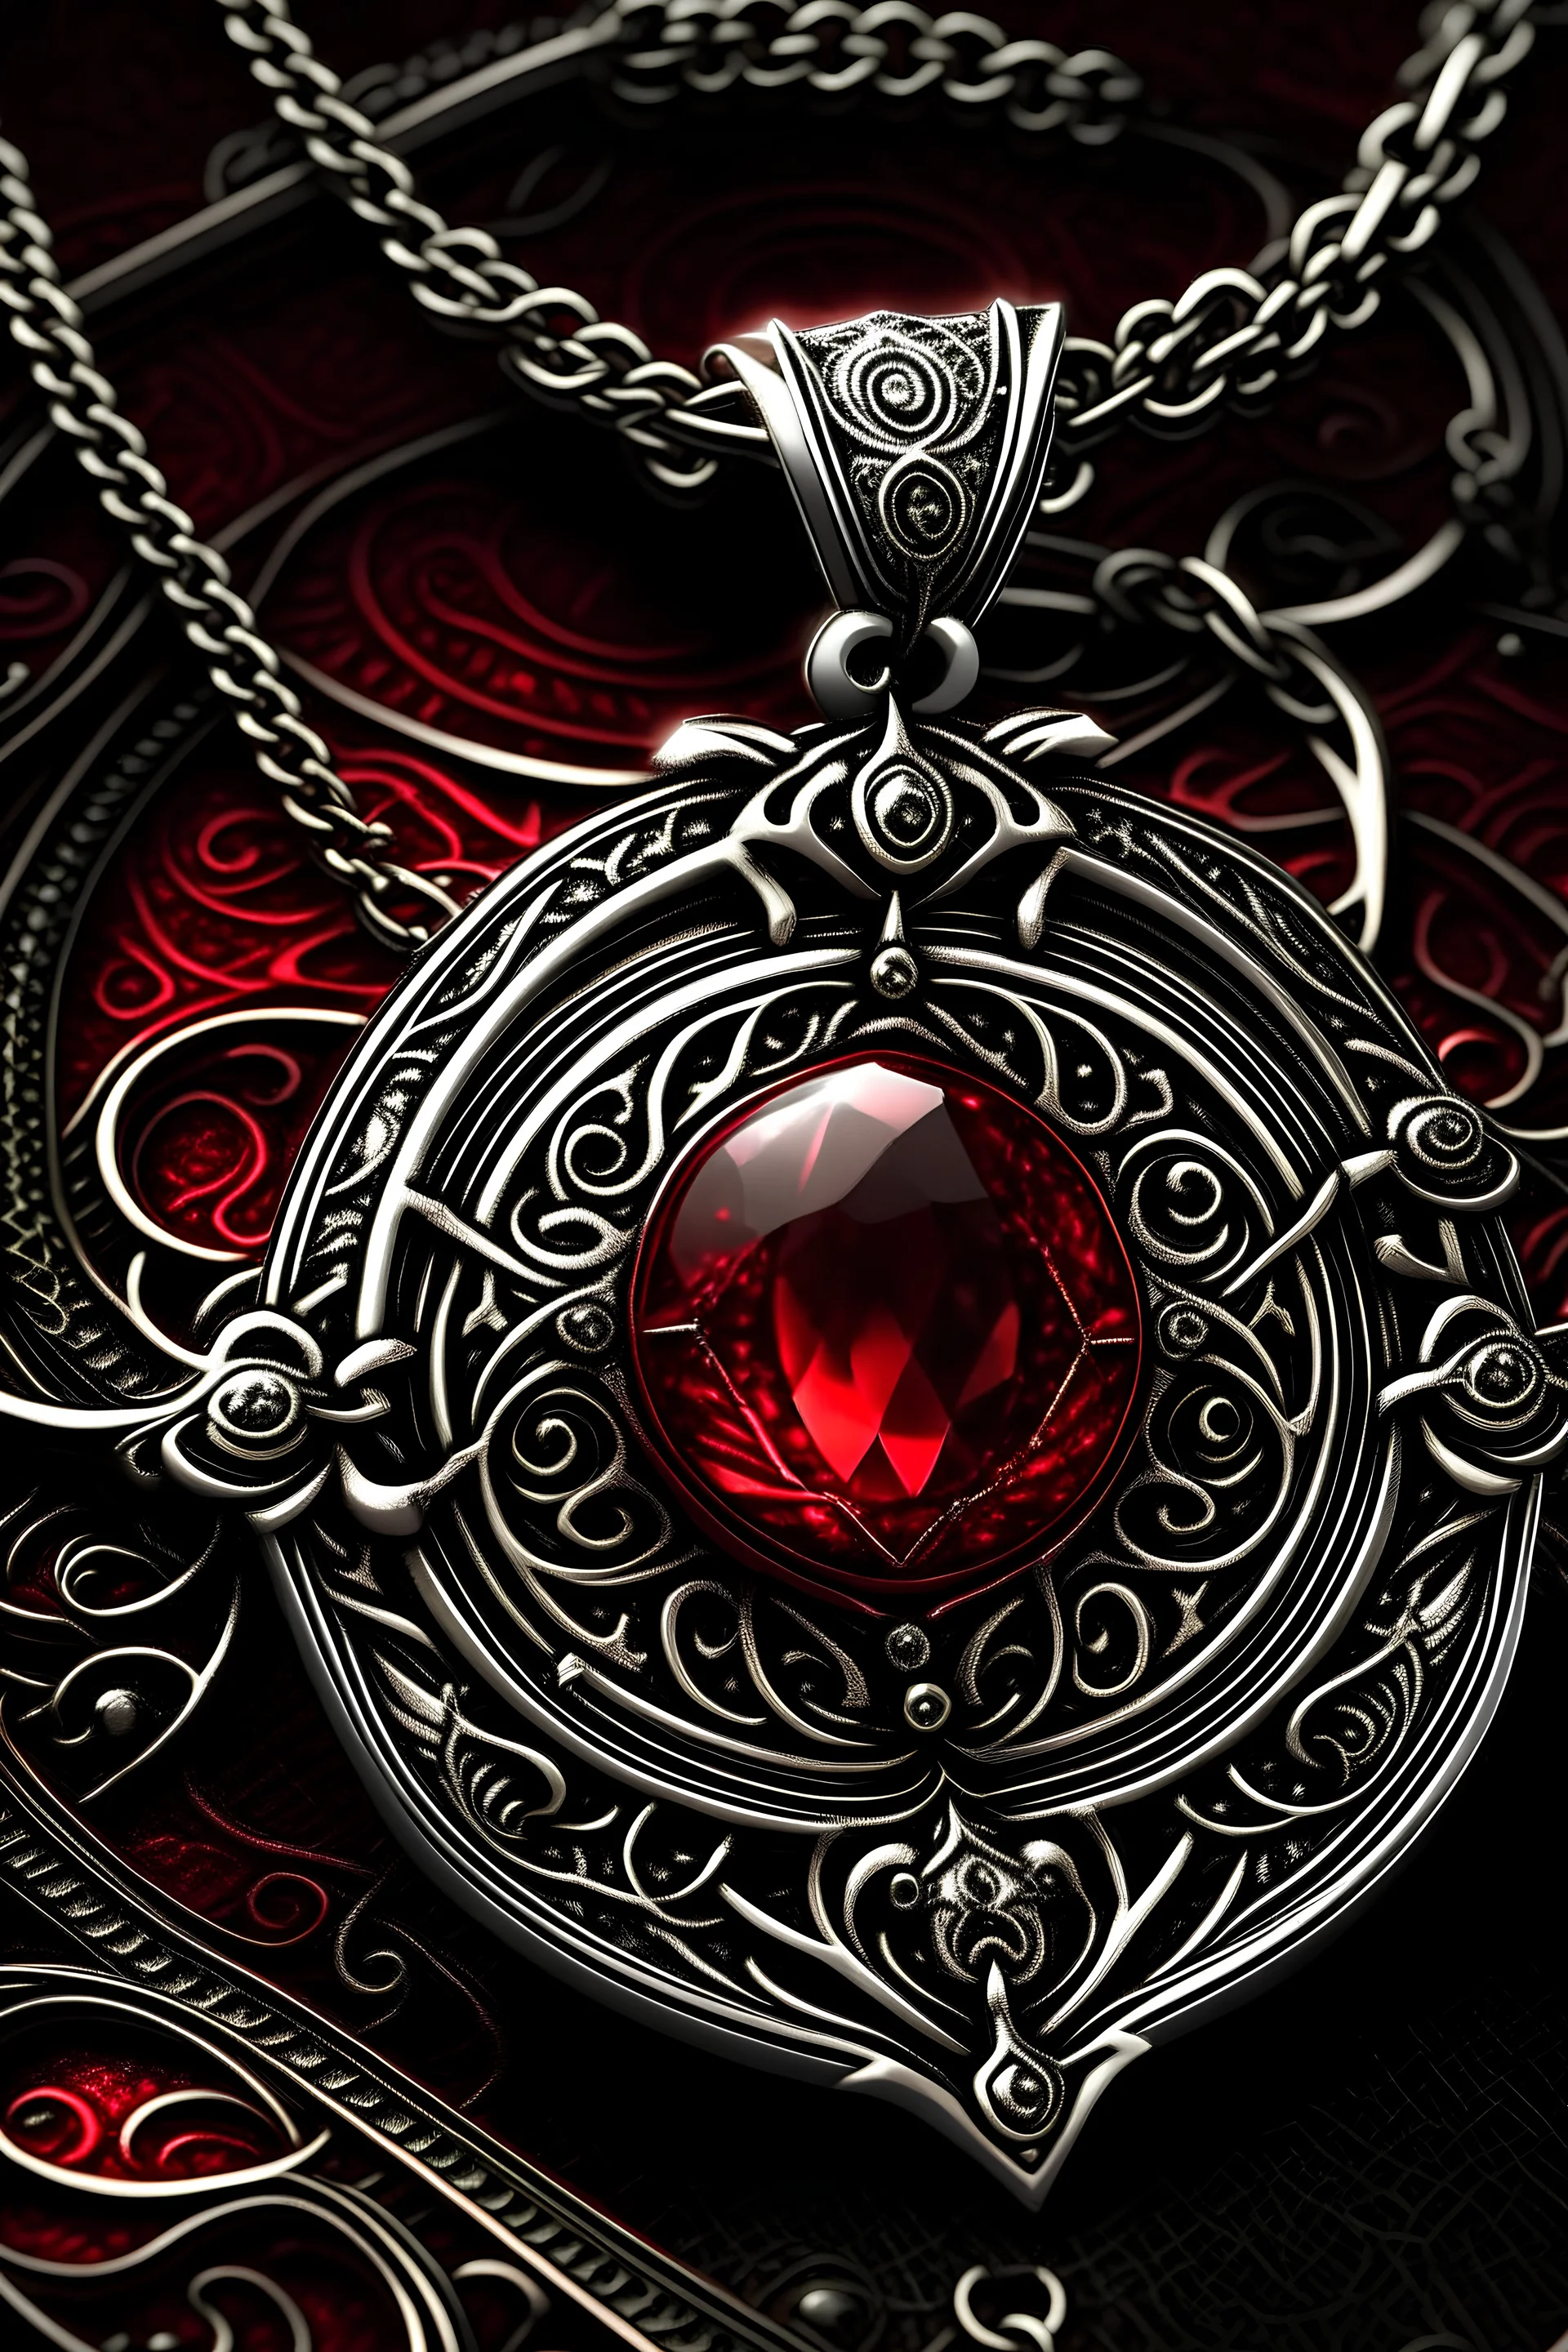 Create a detailed and enchanting illustration of the "Crimson Sanctifier Amulet." The amulet features a deep crimson gemstone that pulsates with divine energy. Show the amulet being worn around the neck, with the gemstone glowing and radiating a soft, ethereal light. Capture the synergy of both barbaric and divine elements in the design, and highlight the intricate details of the amulet's craftsmanship.